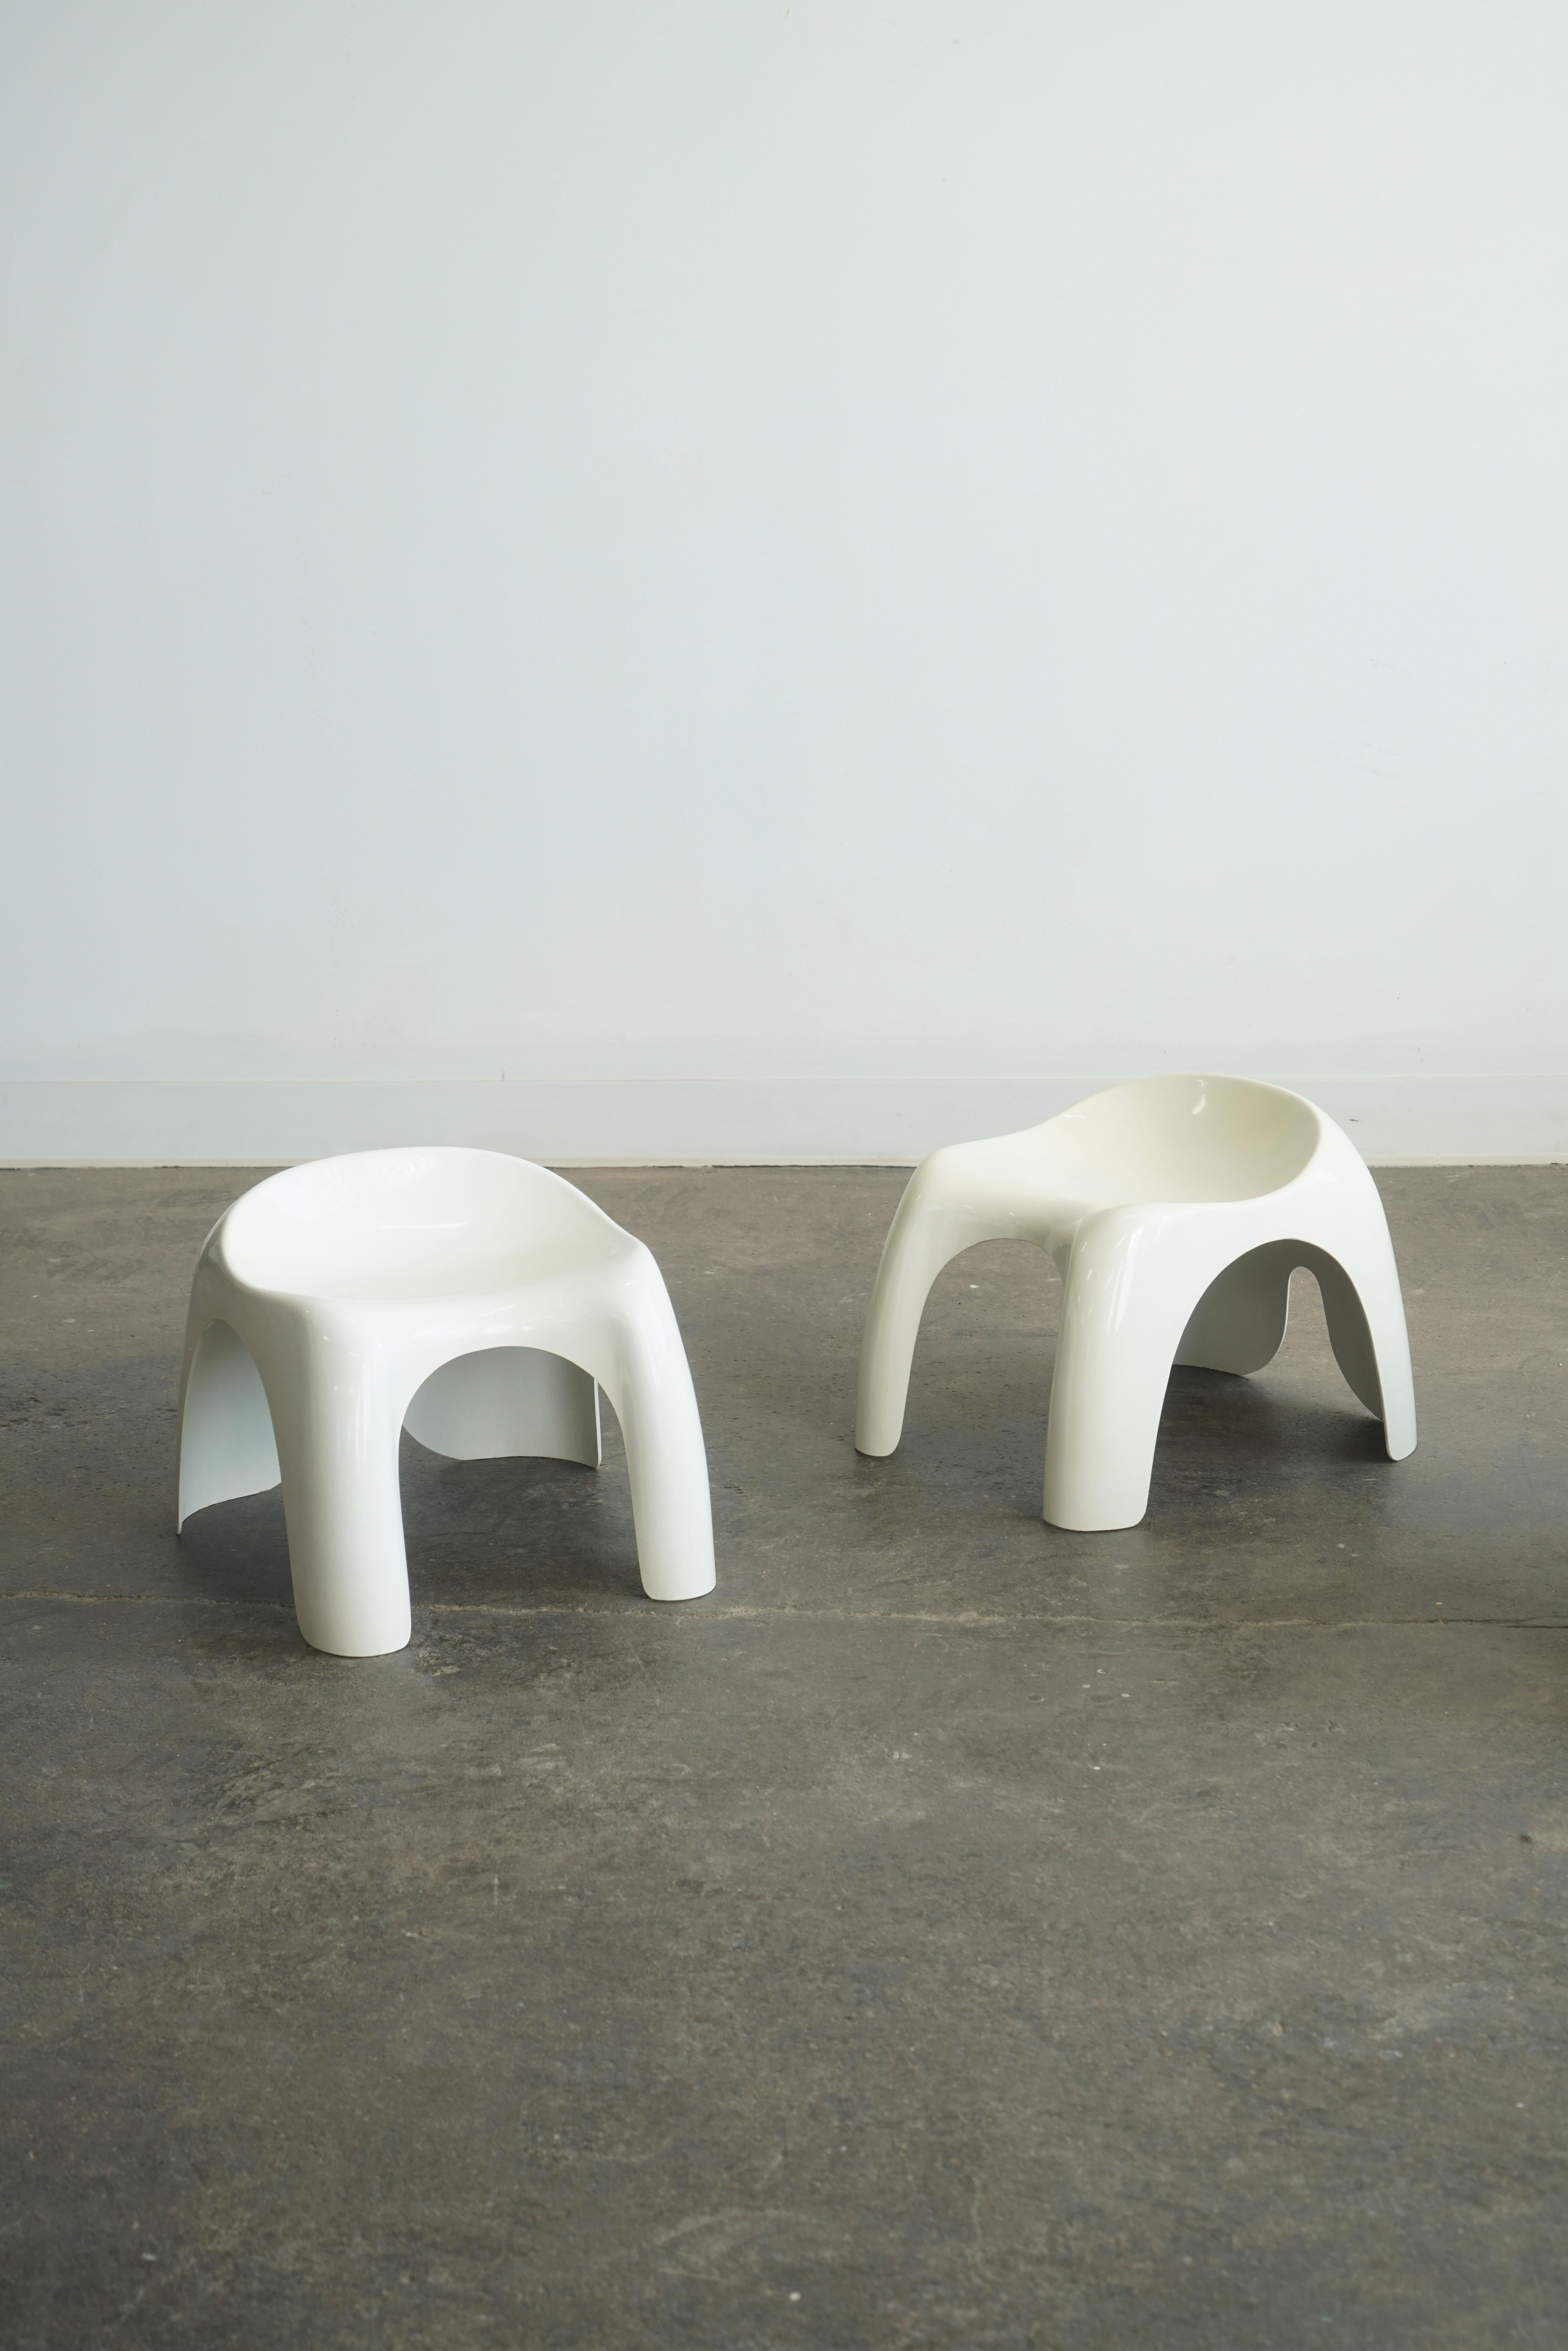 stackable plastic stool